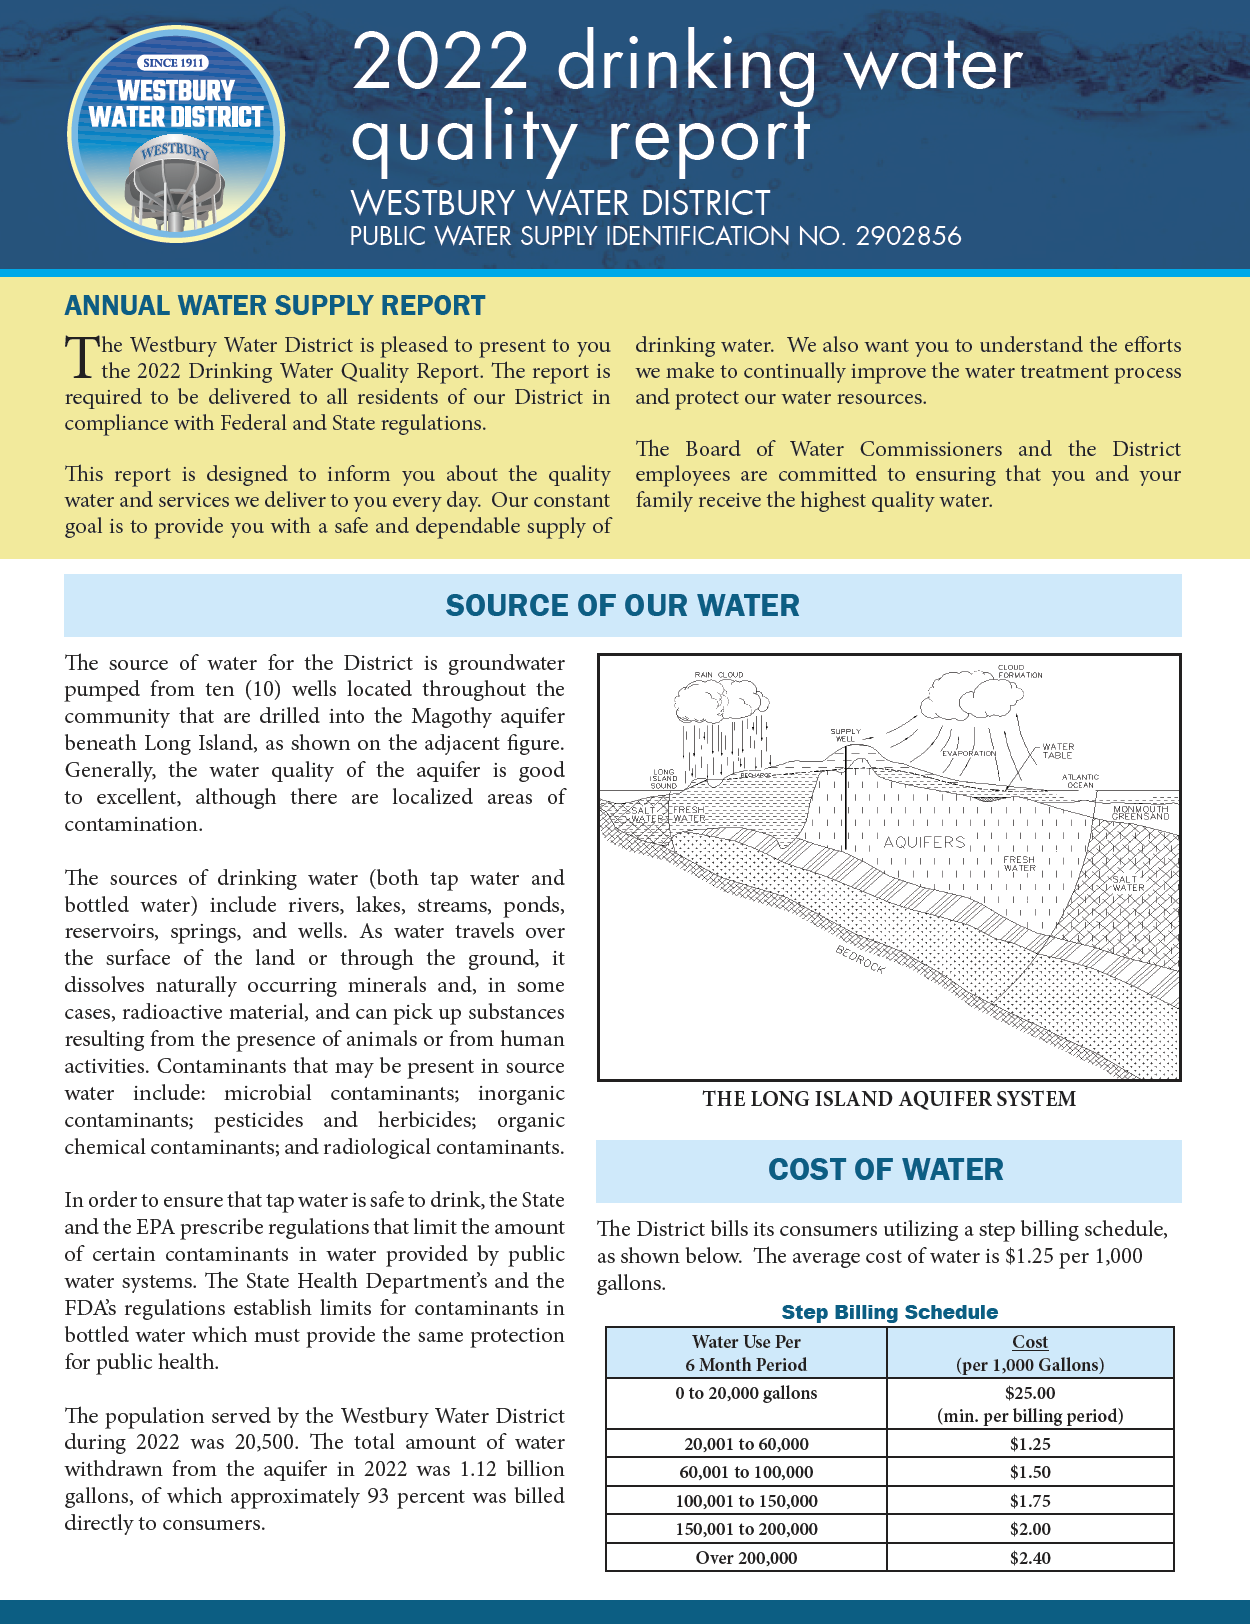 2022 Water Quality Report